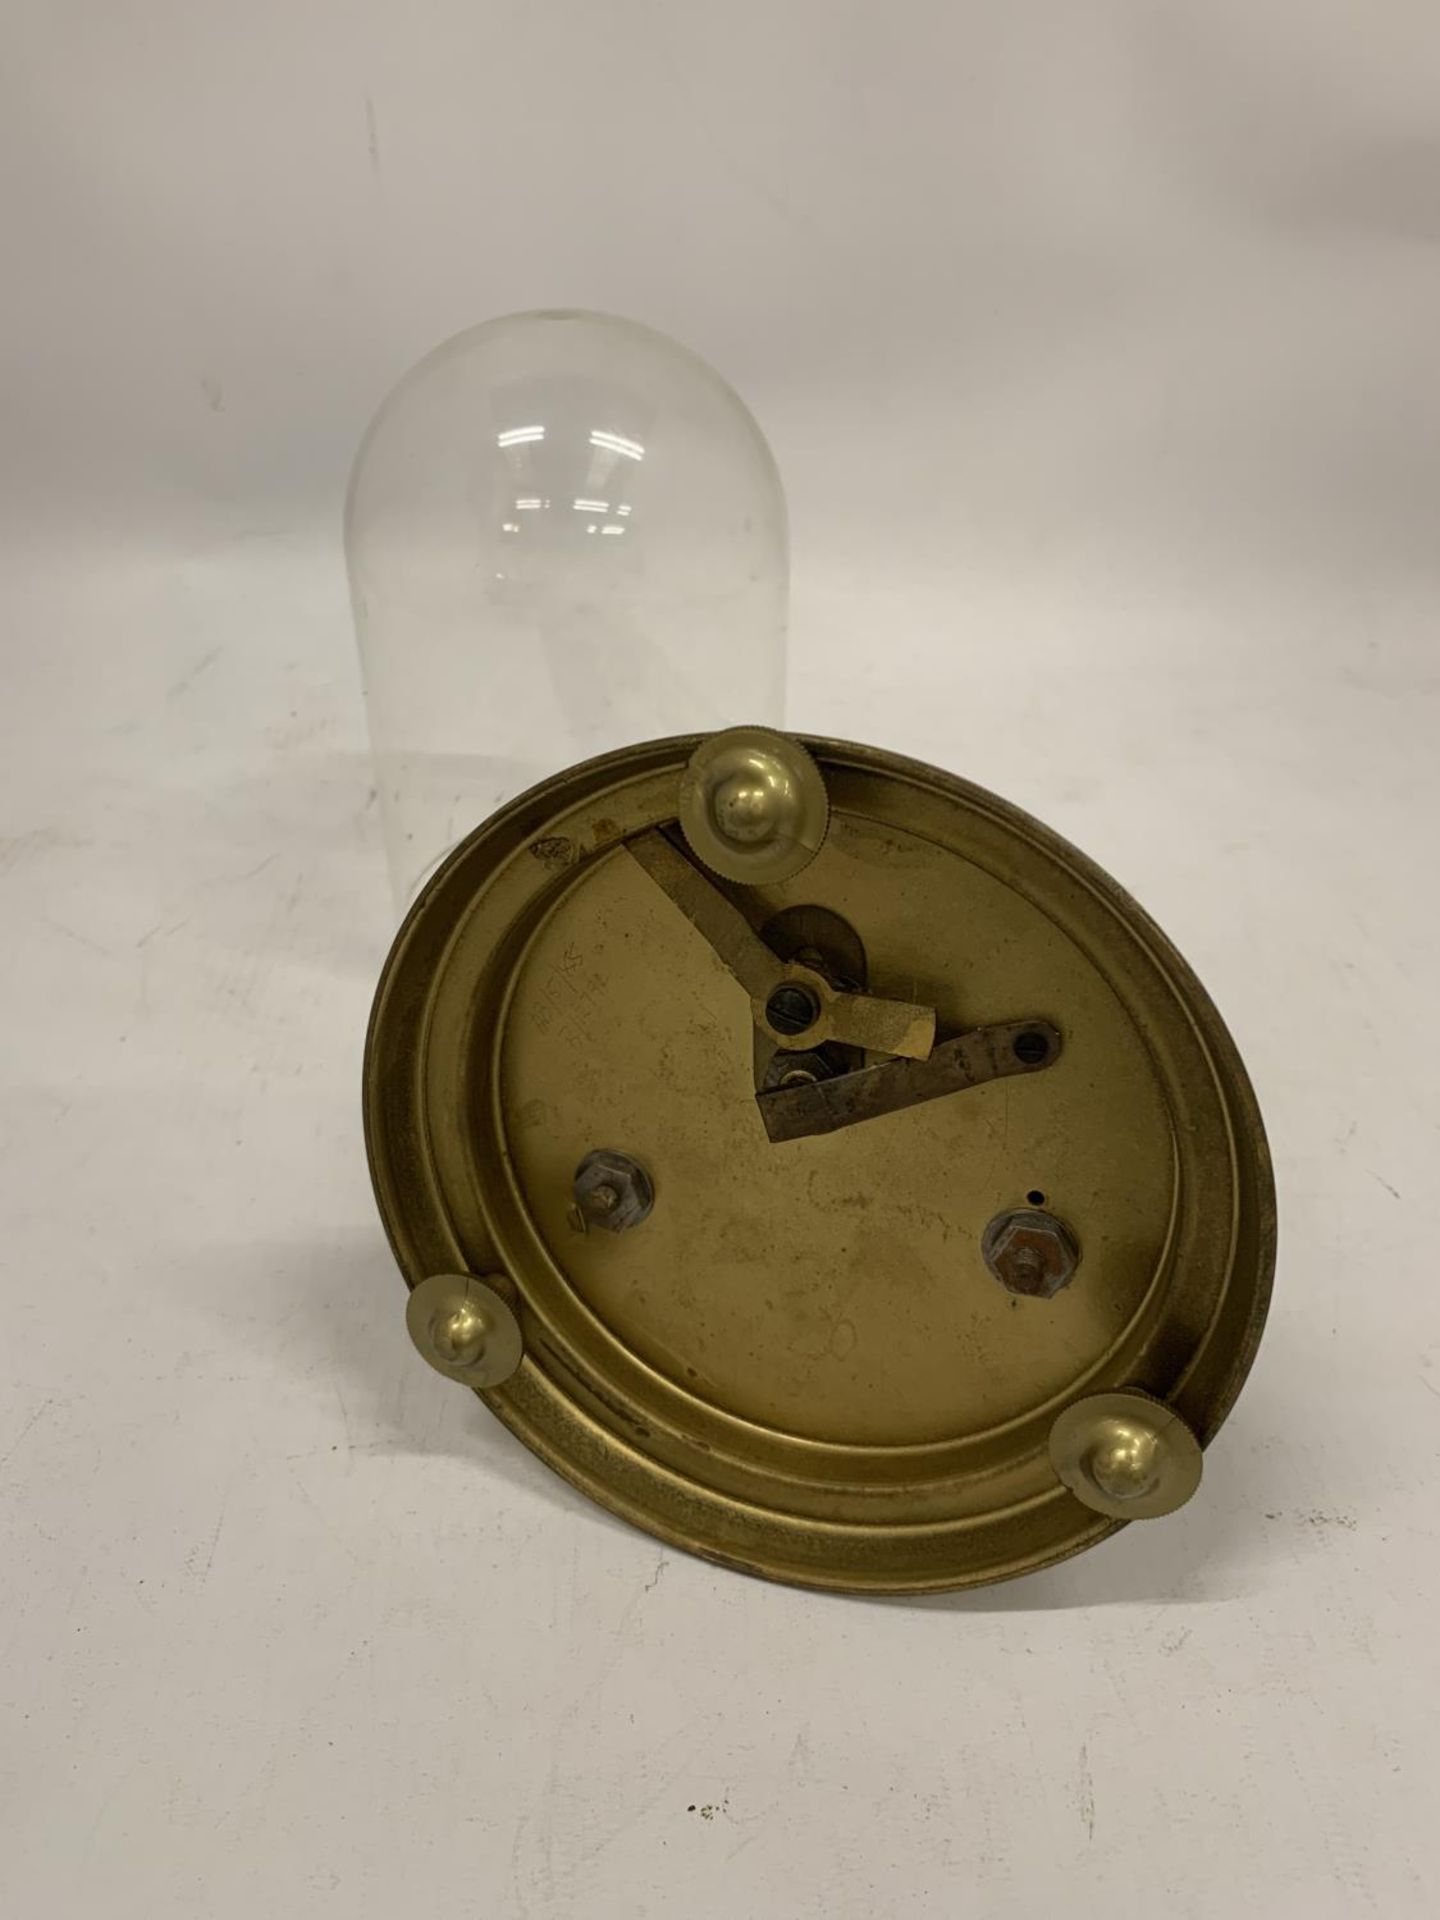 A BRASS ANNIVERSARY CLOCK WITH A DOME - Image 4 of 4